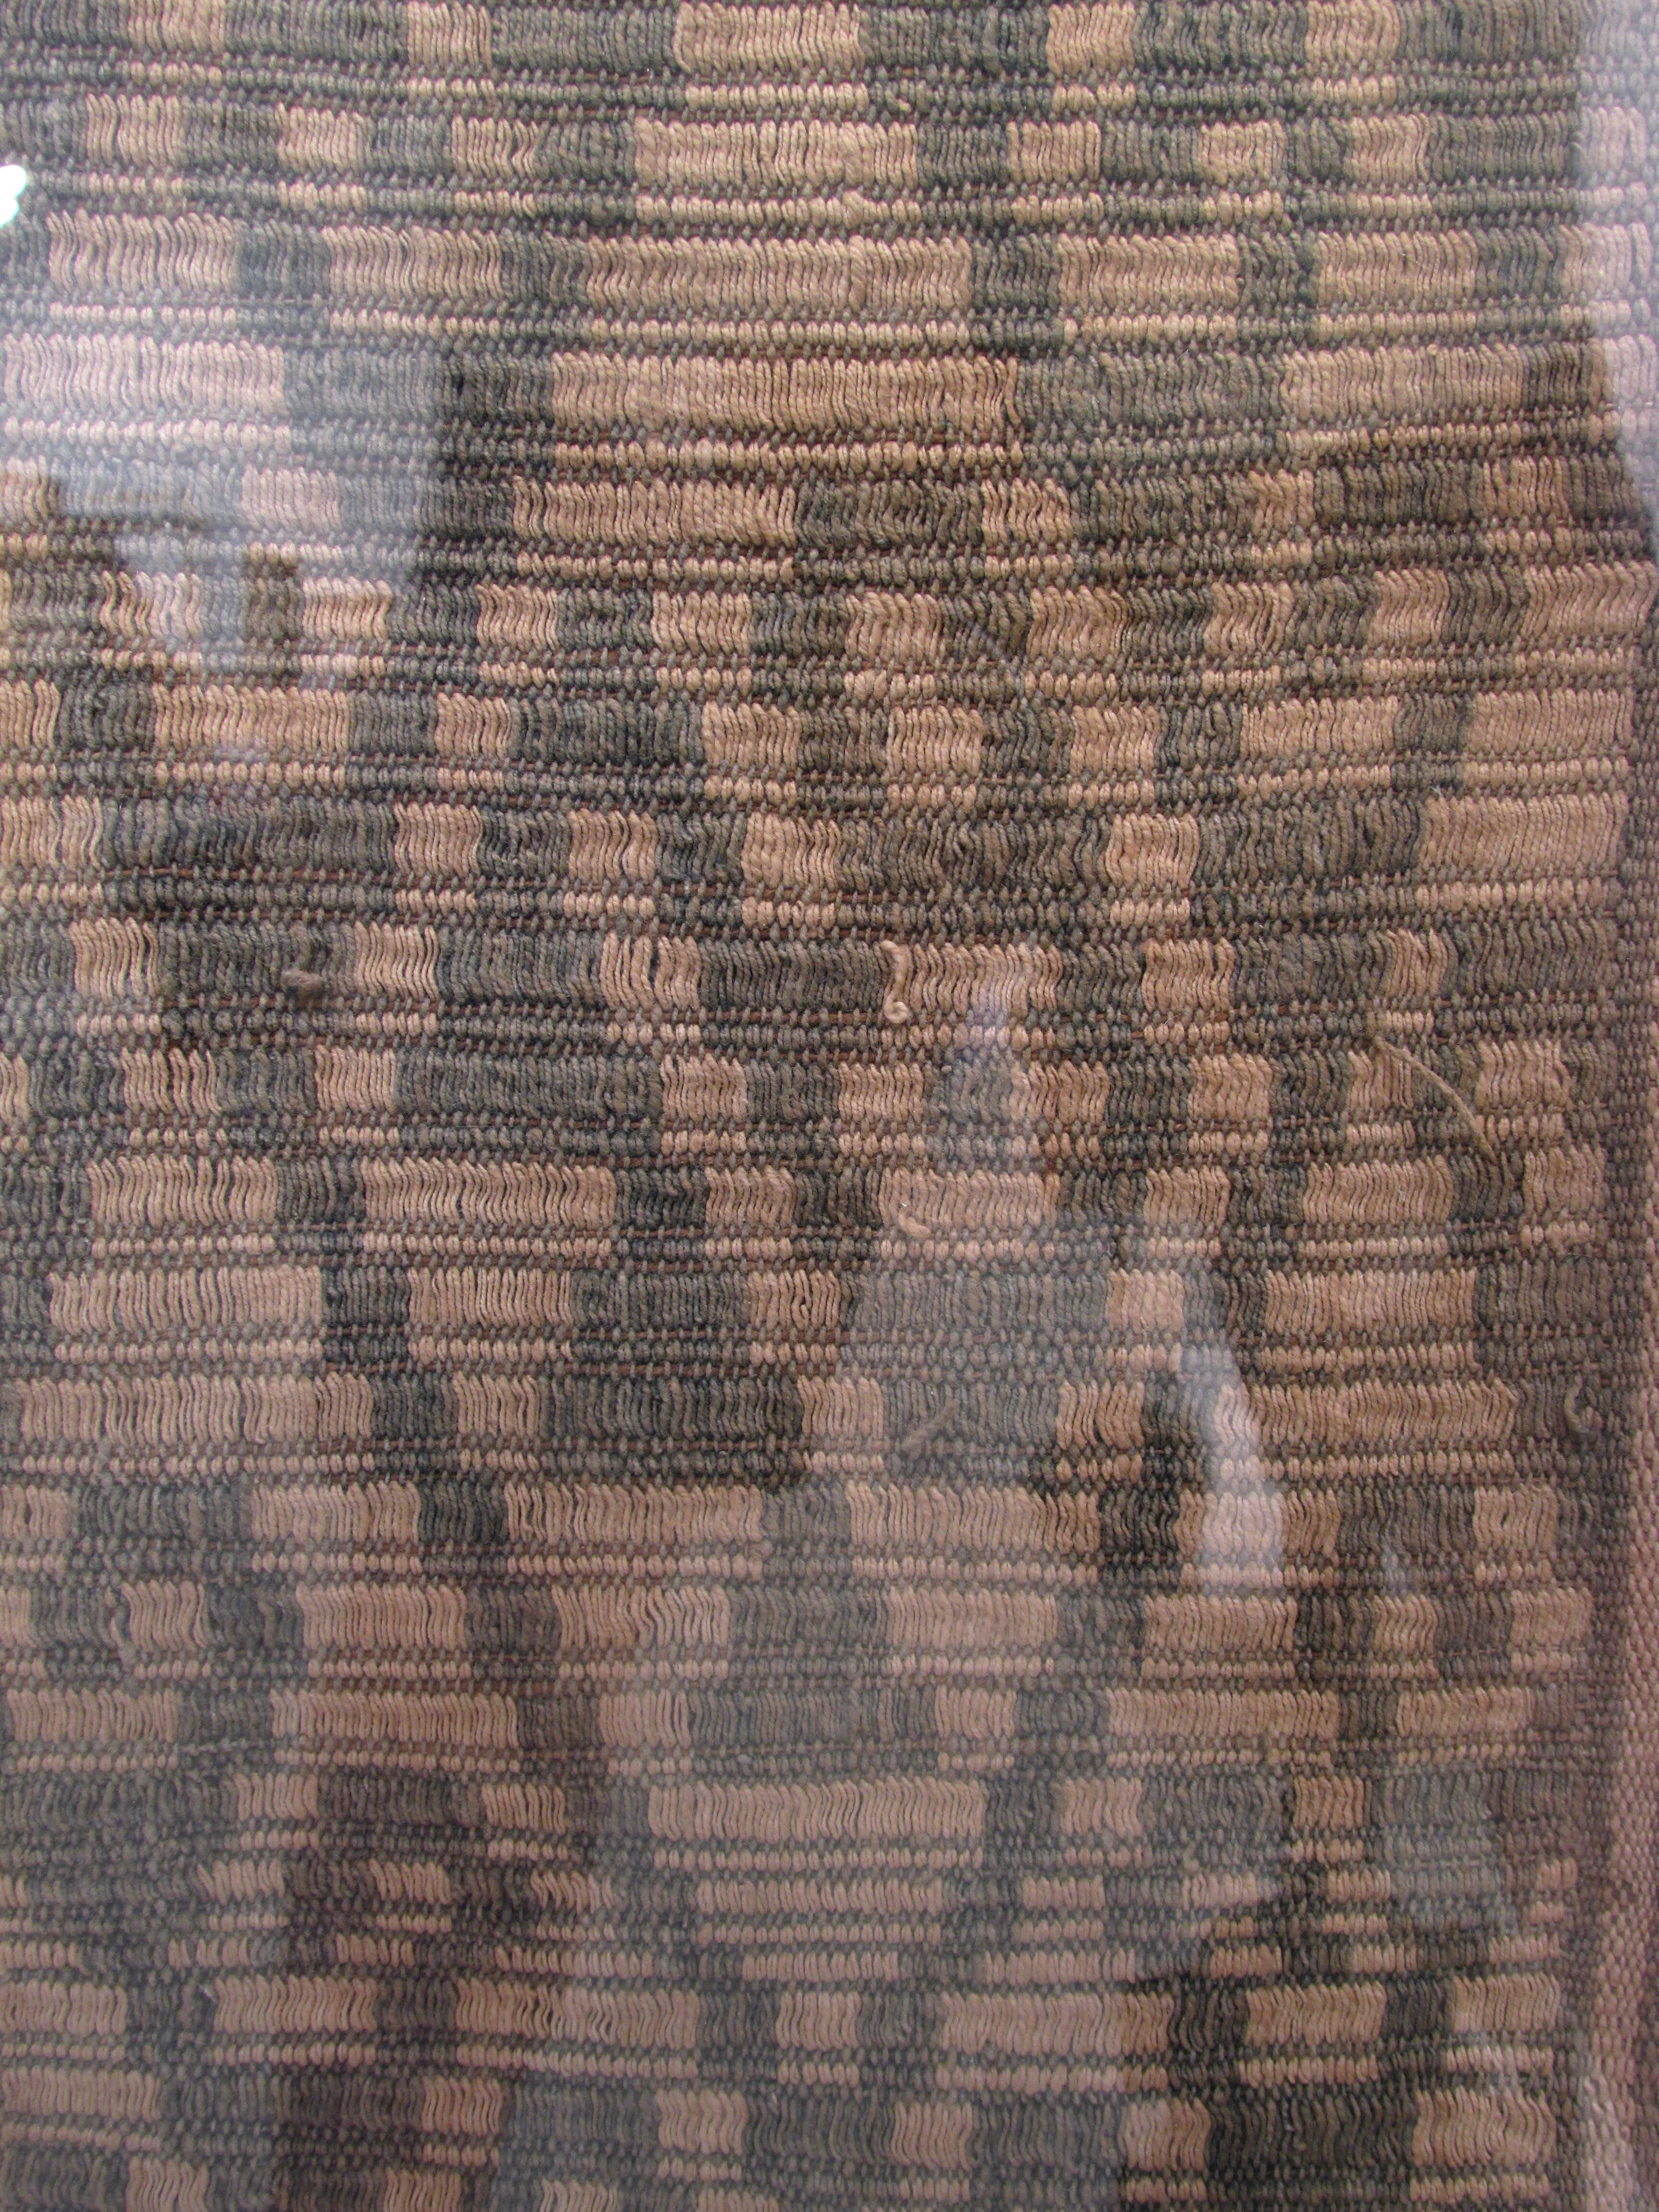 Pre-Colombian Fabric from Peru 1